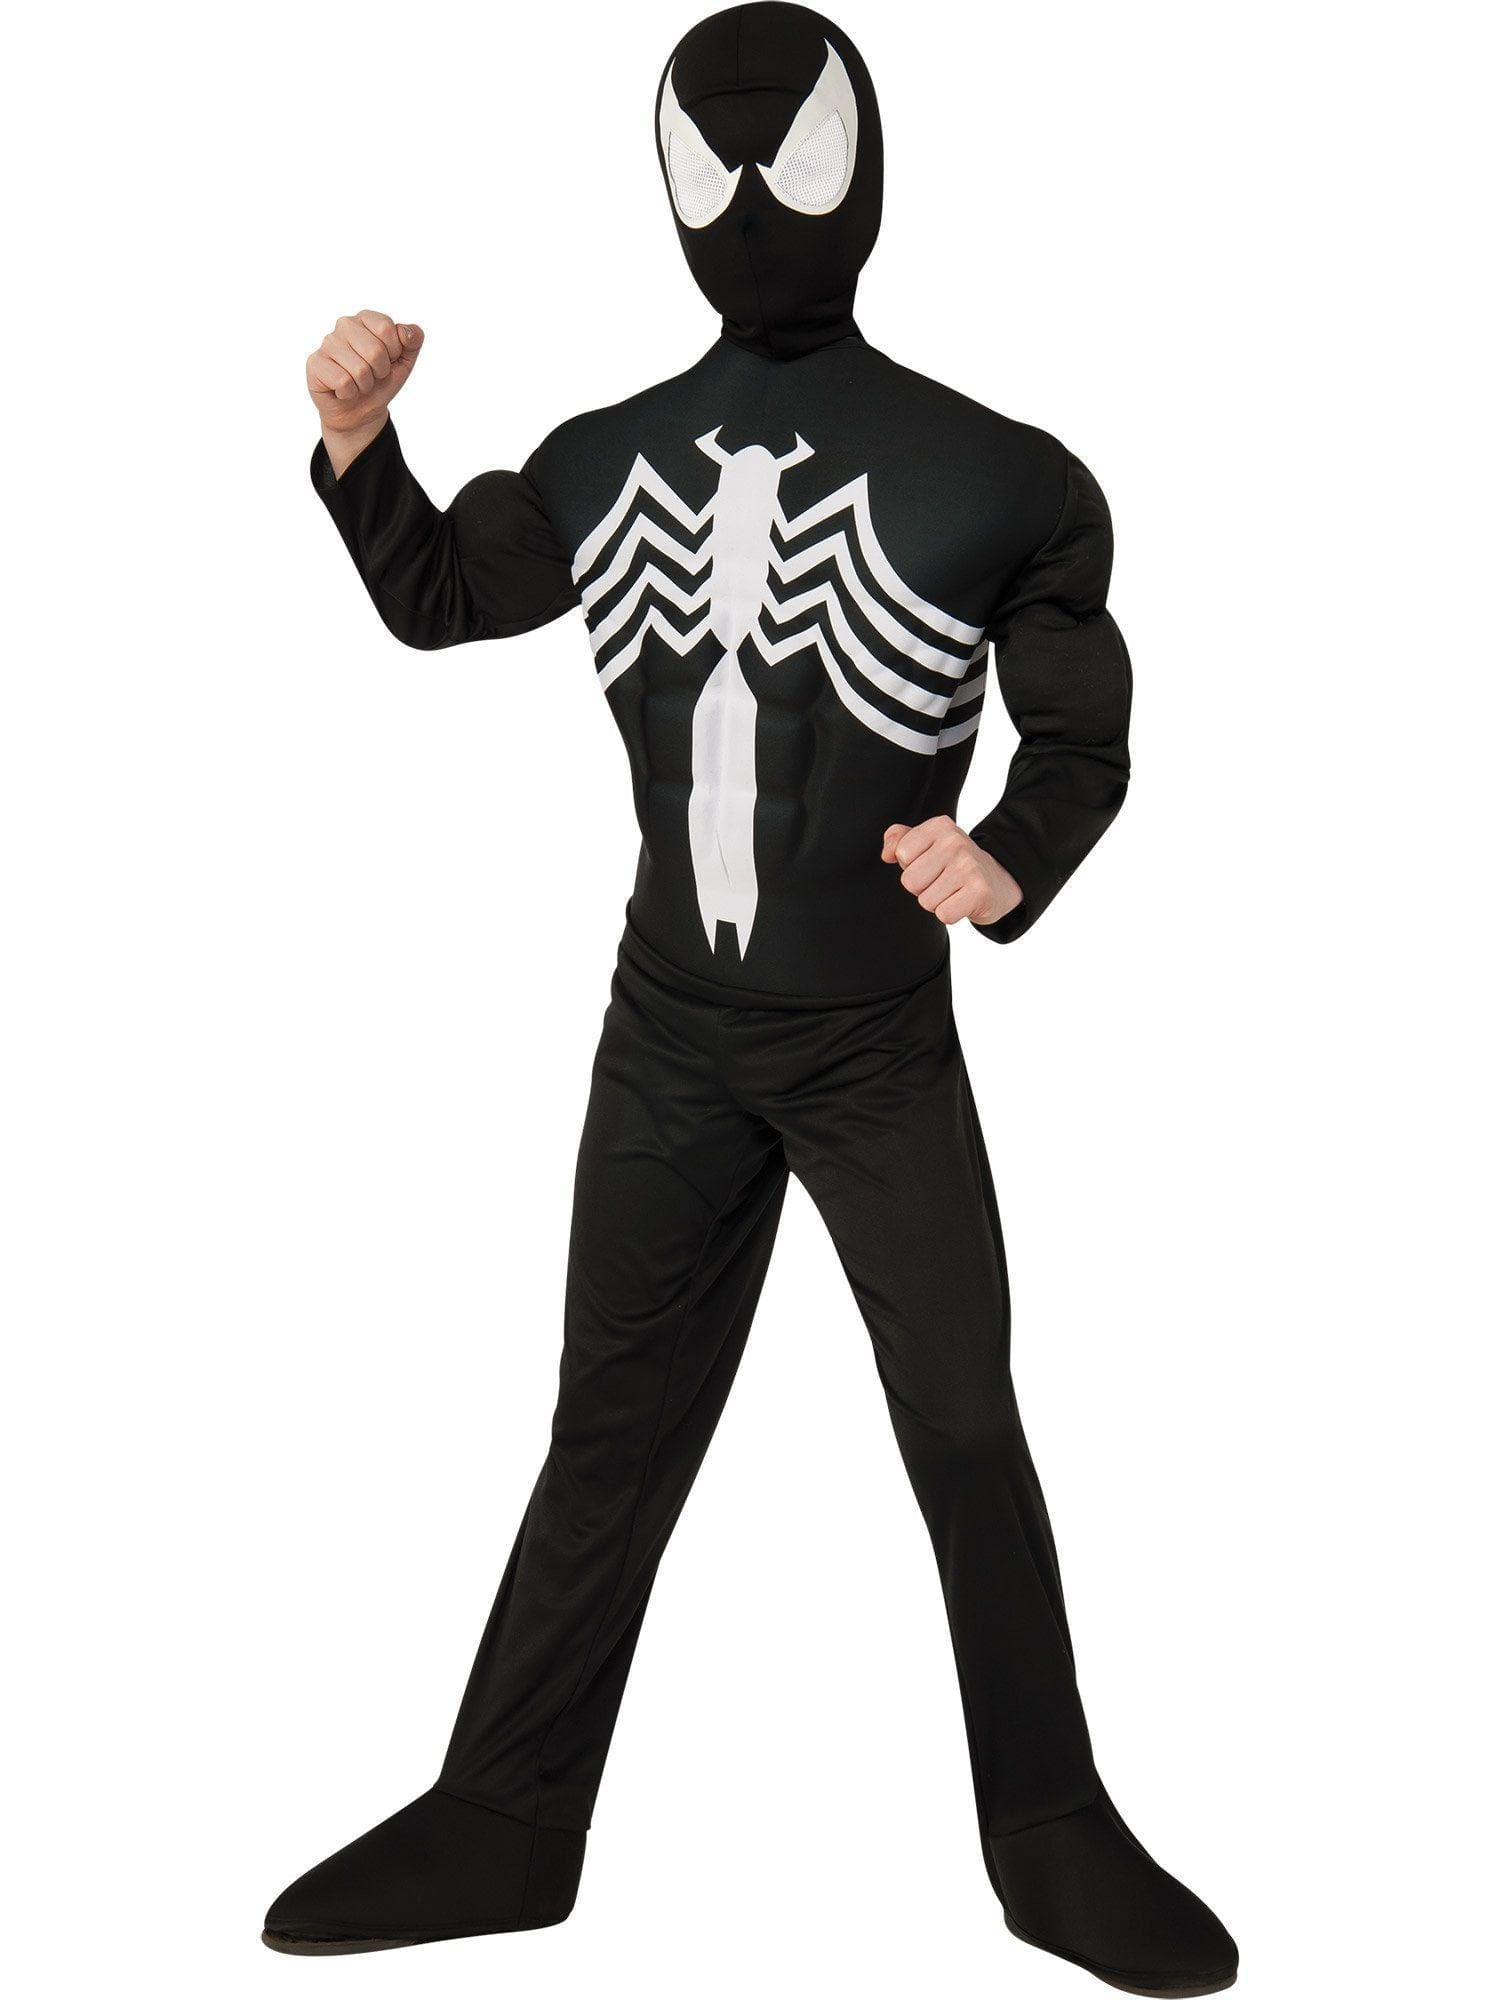 Kids Black Spider Spiderman Muscle Chest Costume - costumes.com